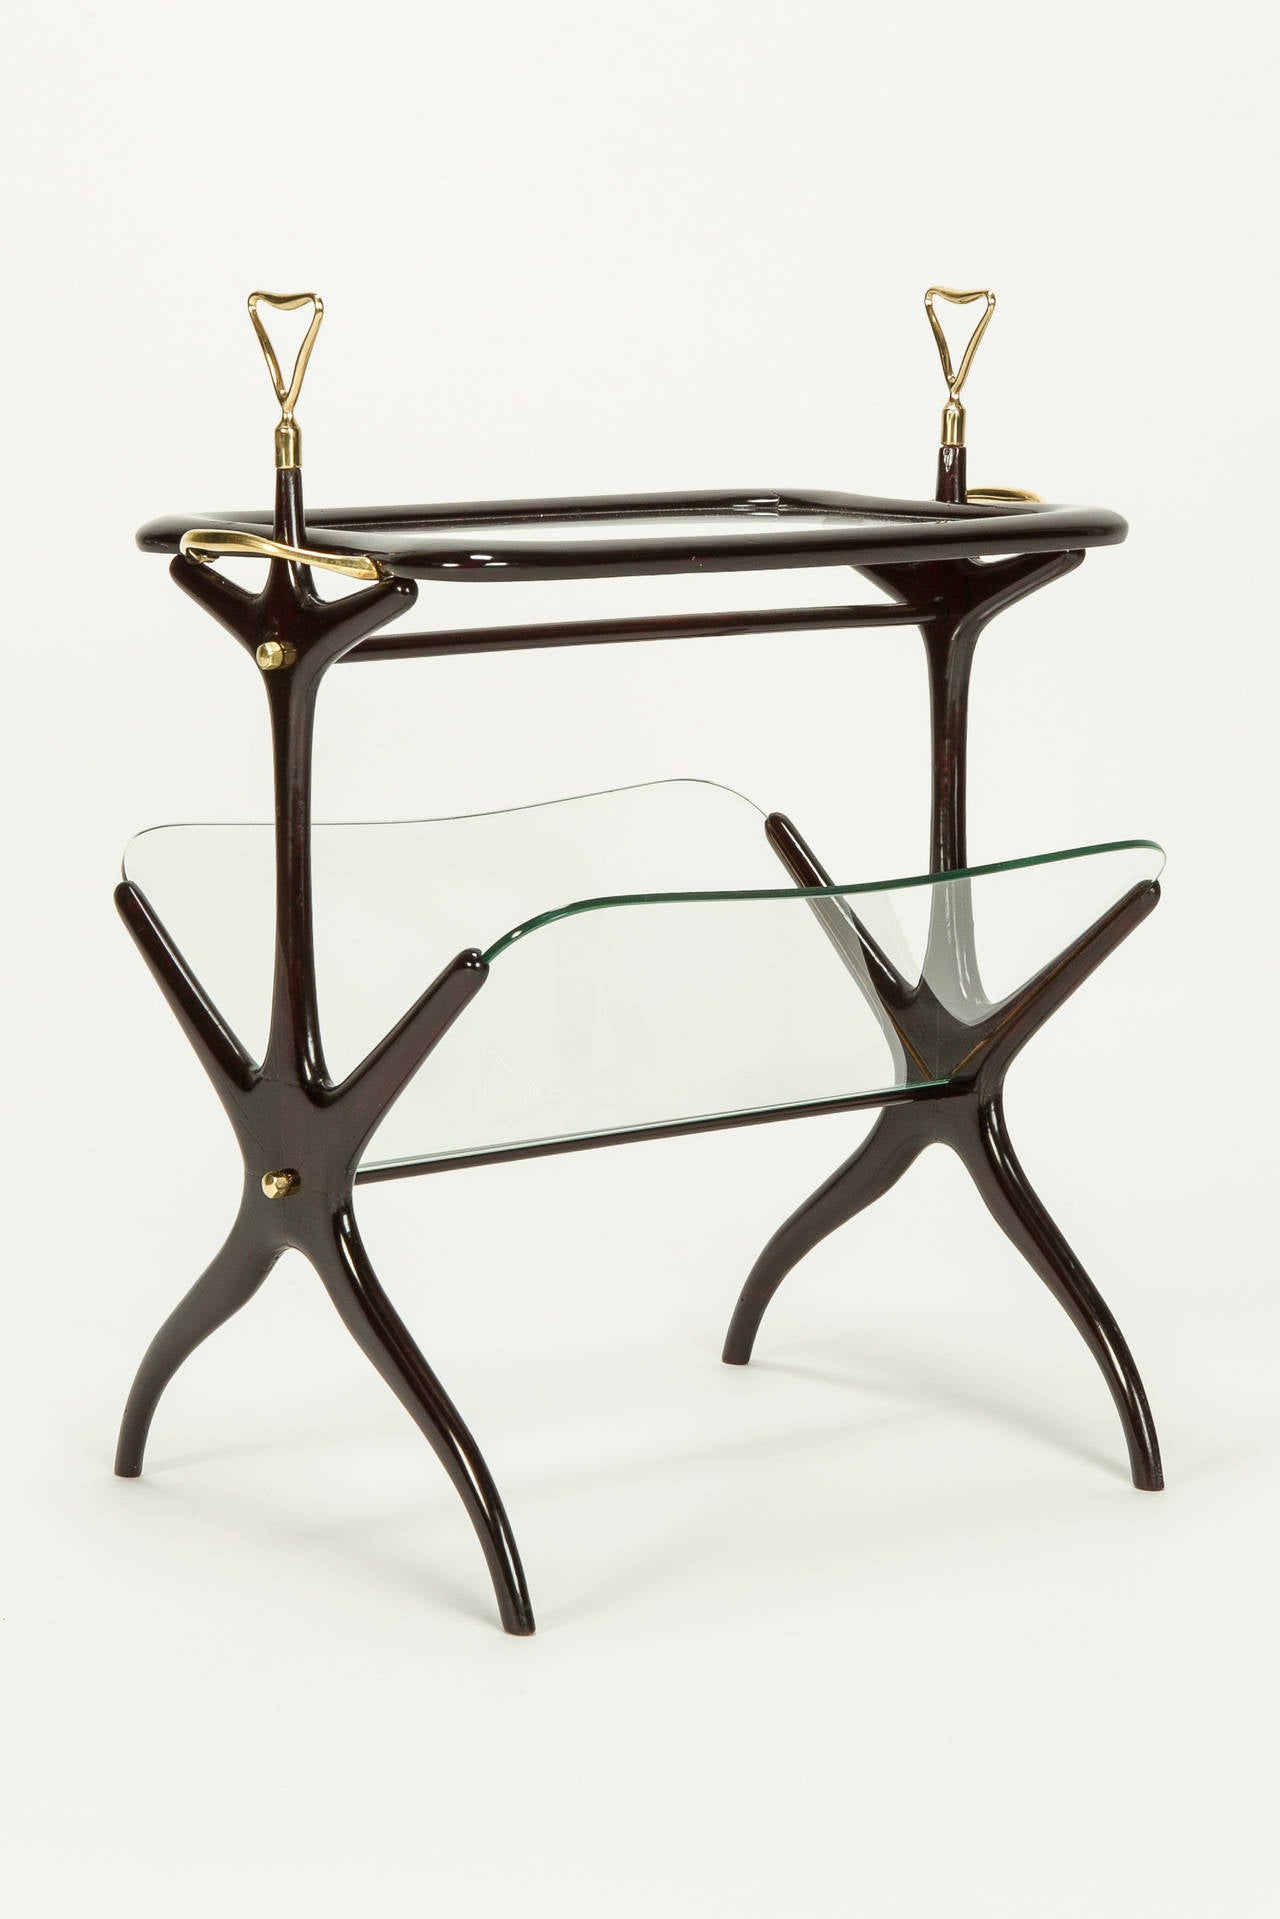 Sophisticated side table by Cesare Lacca, Italy, 1950s. The frame is made of lacquered mahogany; the top tray is removable to serve drinks with brass handles. Underneath are glass shelves for magazines and news.